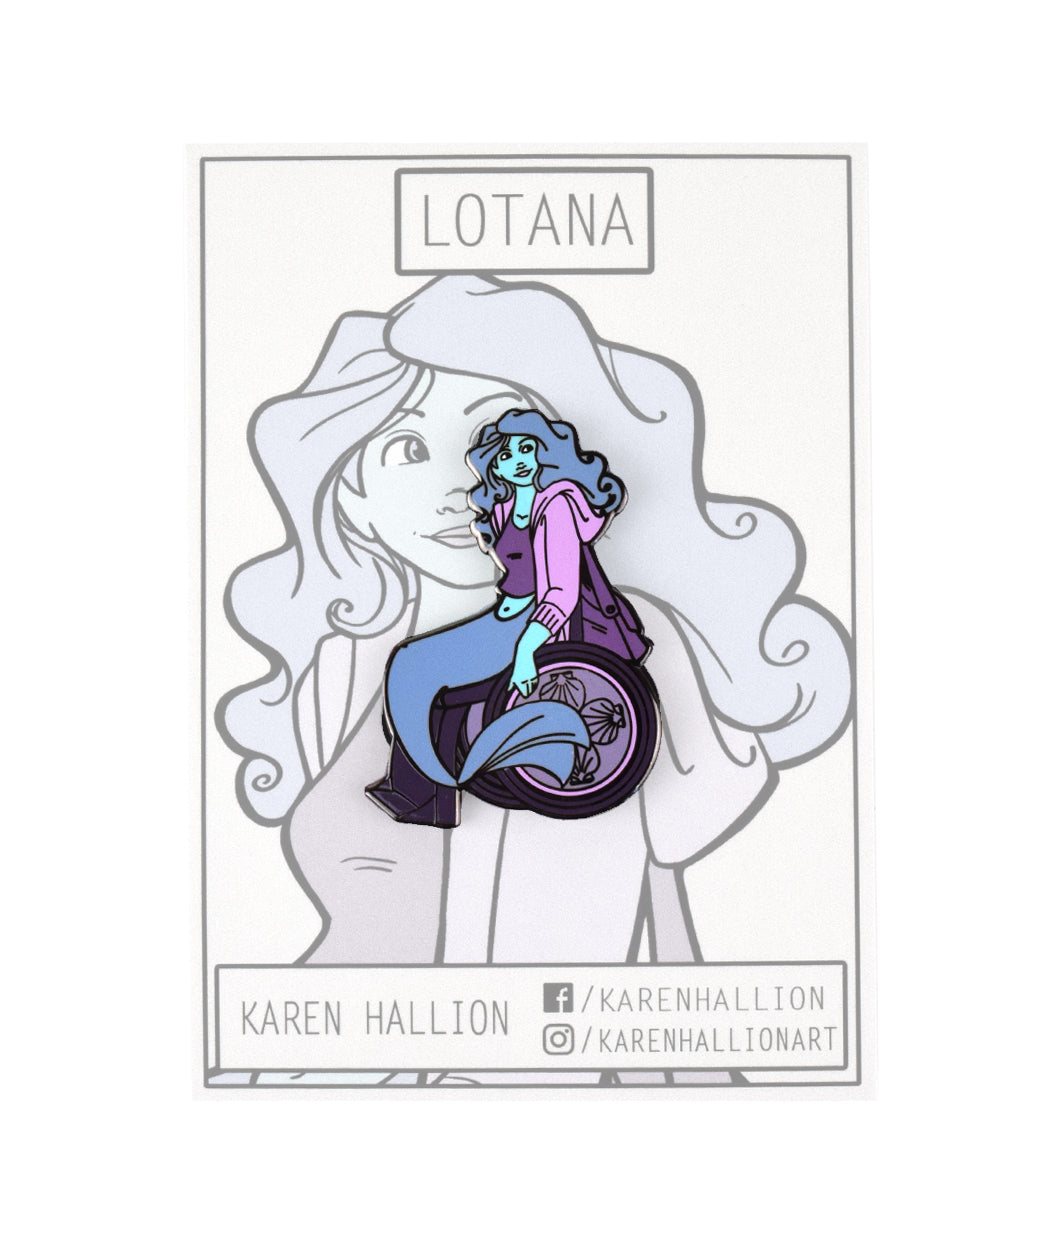 A pin depicting a mermaid sitting in a wheel chair with shells on the wheel. The backing card shows her face and says "Lotana". From Karen Hallion. 